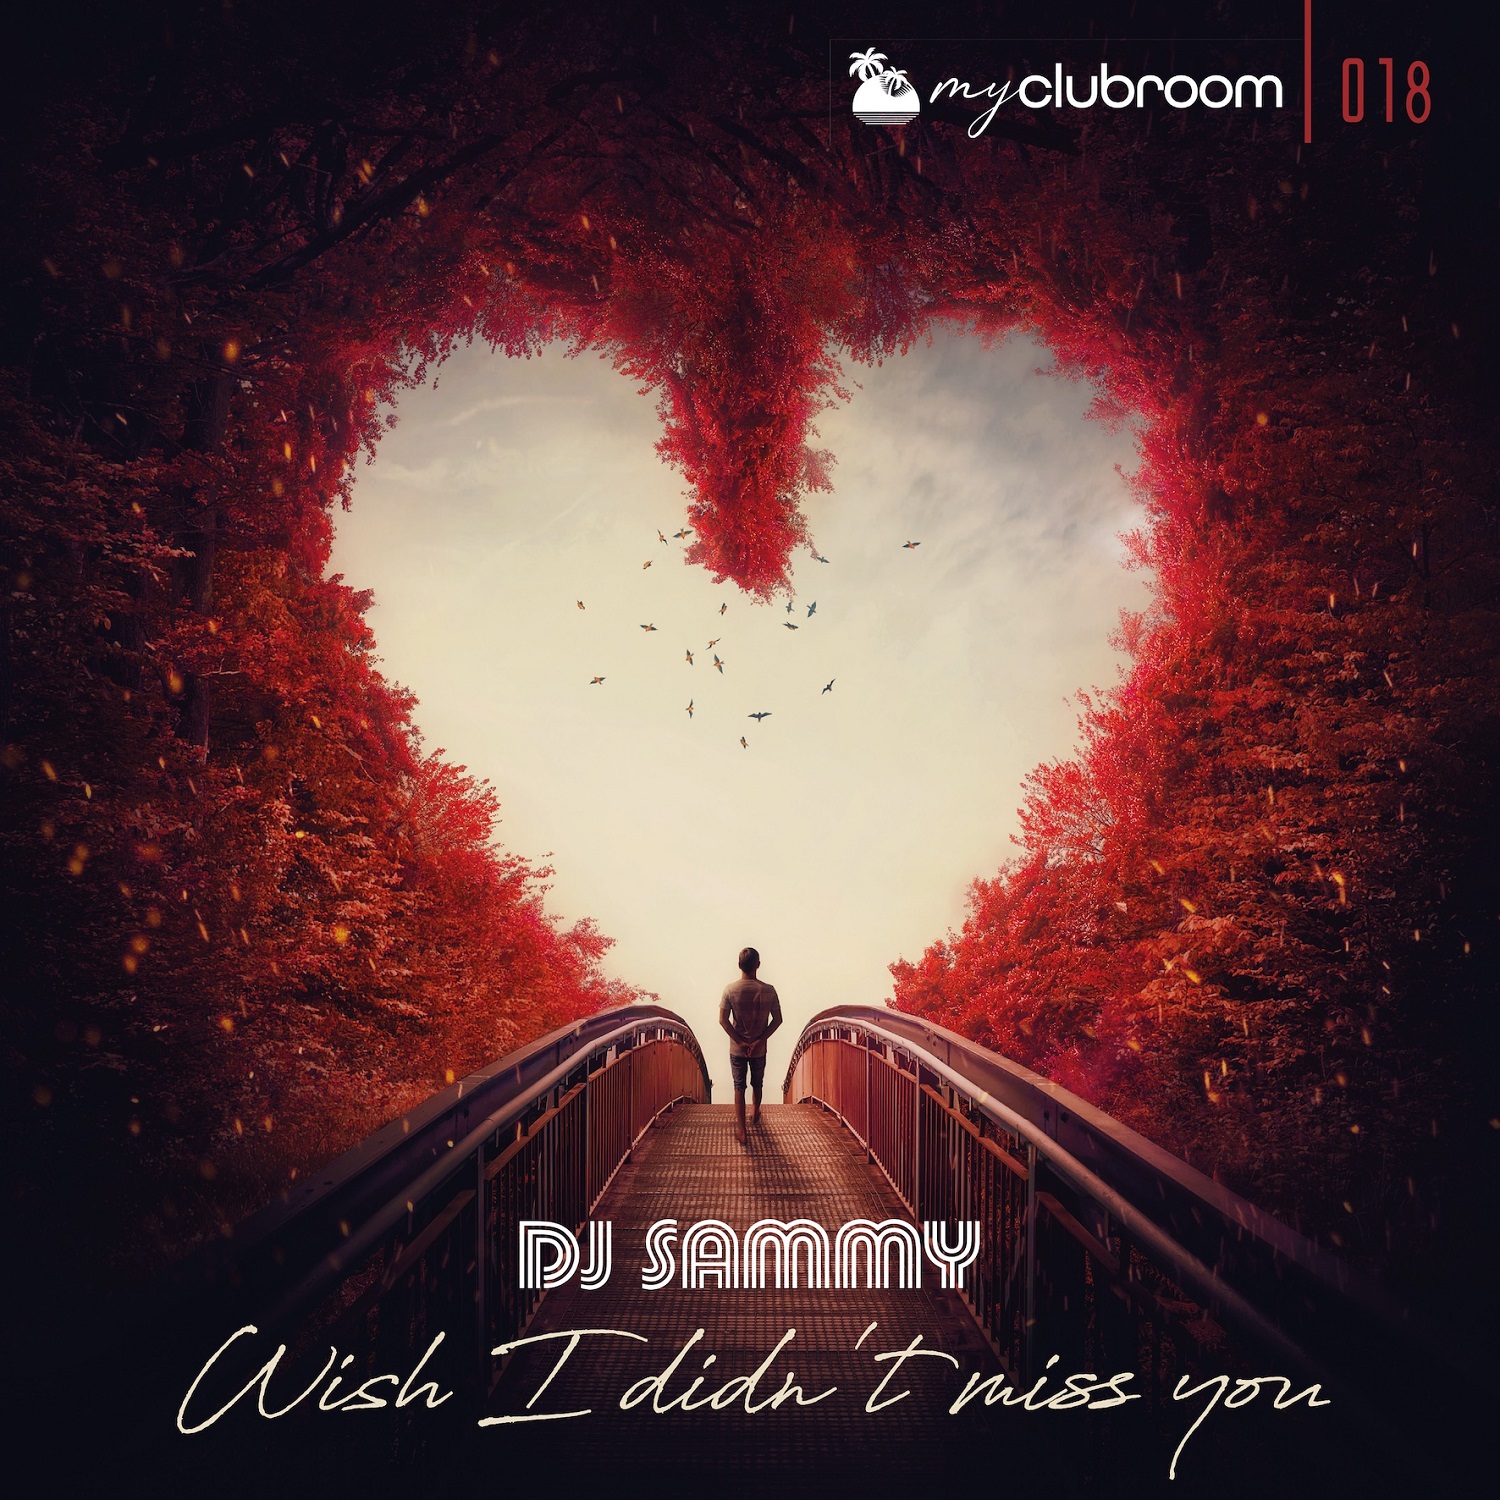 DJ SAMMY Released A Brand New Tune Called “Wish I Didn’t Miss You”!